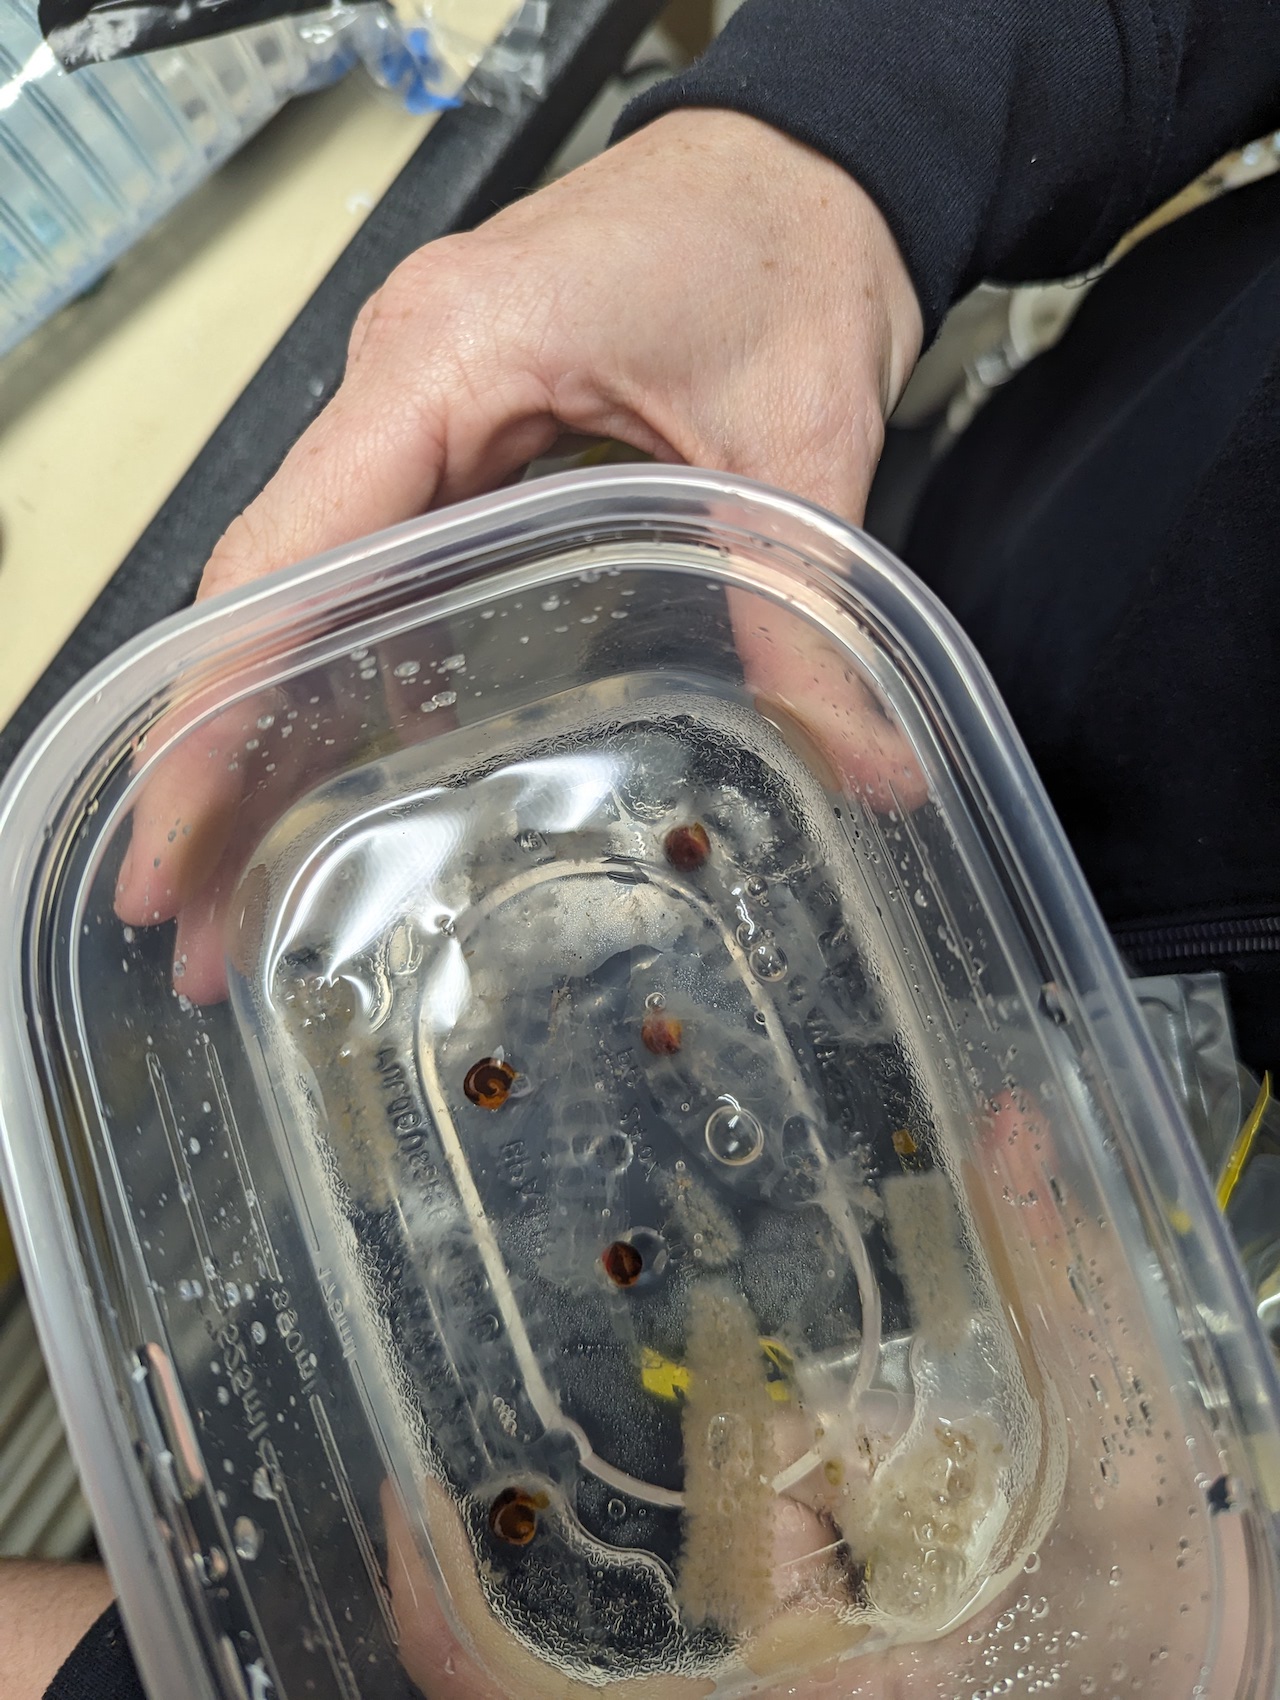 several clear gelatinous salps in a tupperware of water.